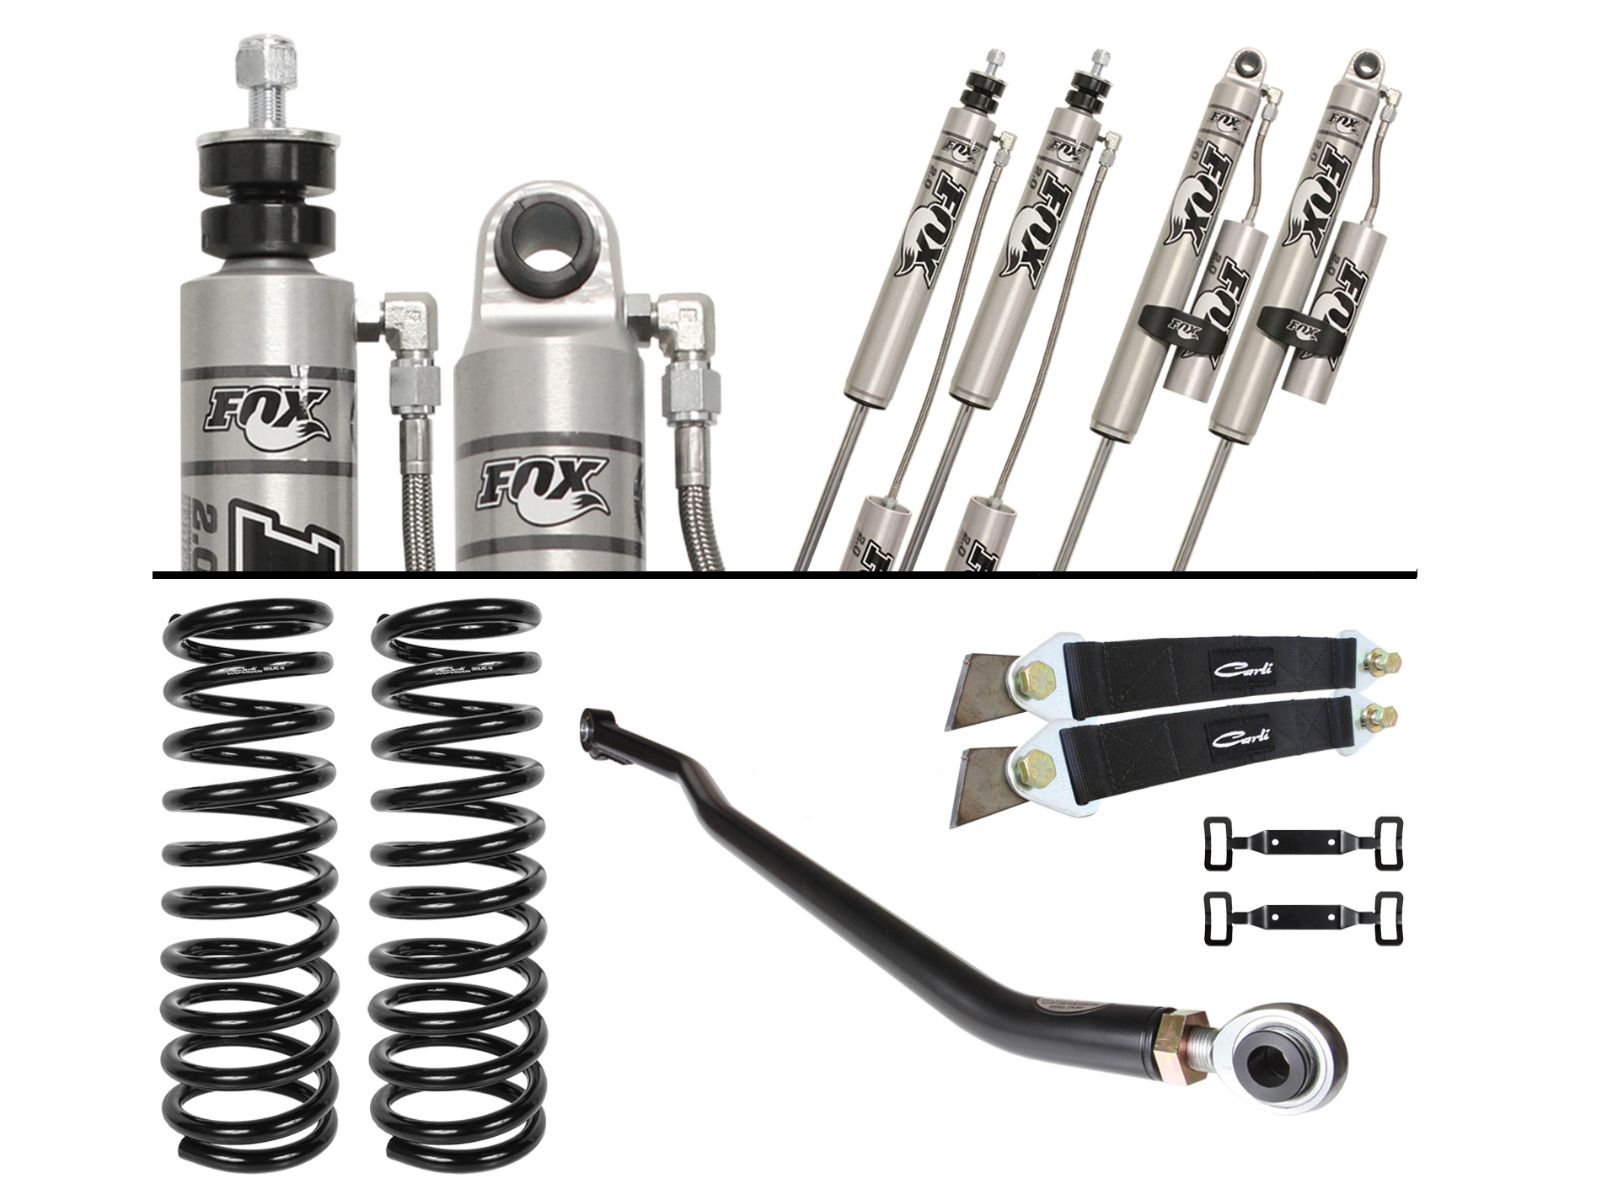 3" 2003-2009 Dodge Ram 3500 4wd (w/Diesel Engine) Backcountry Lift System by Carli Suspension